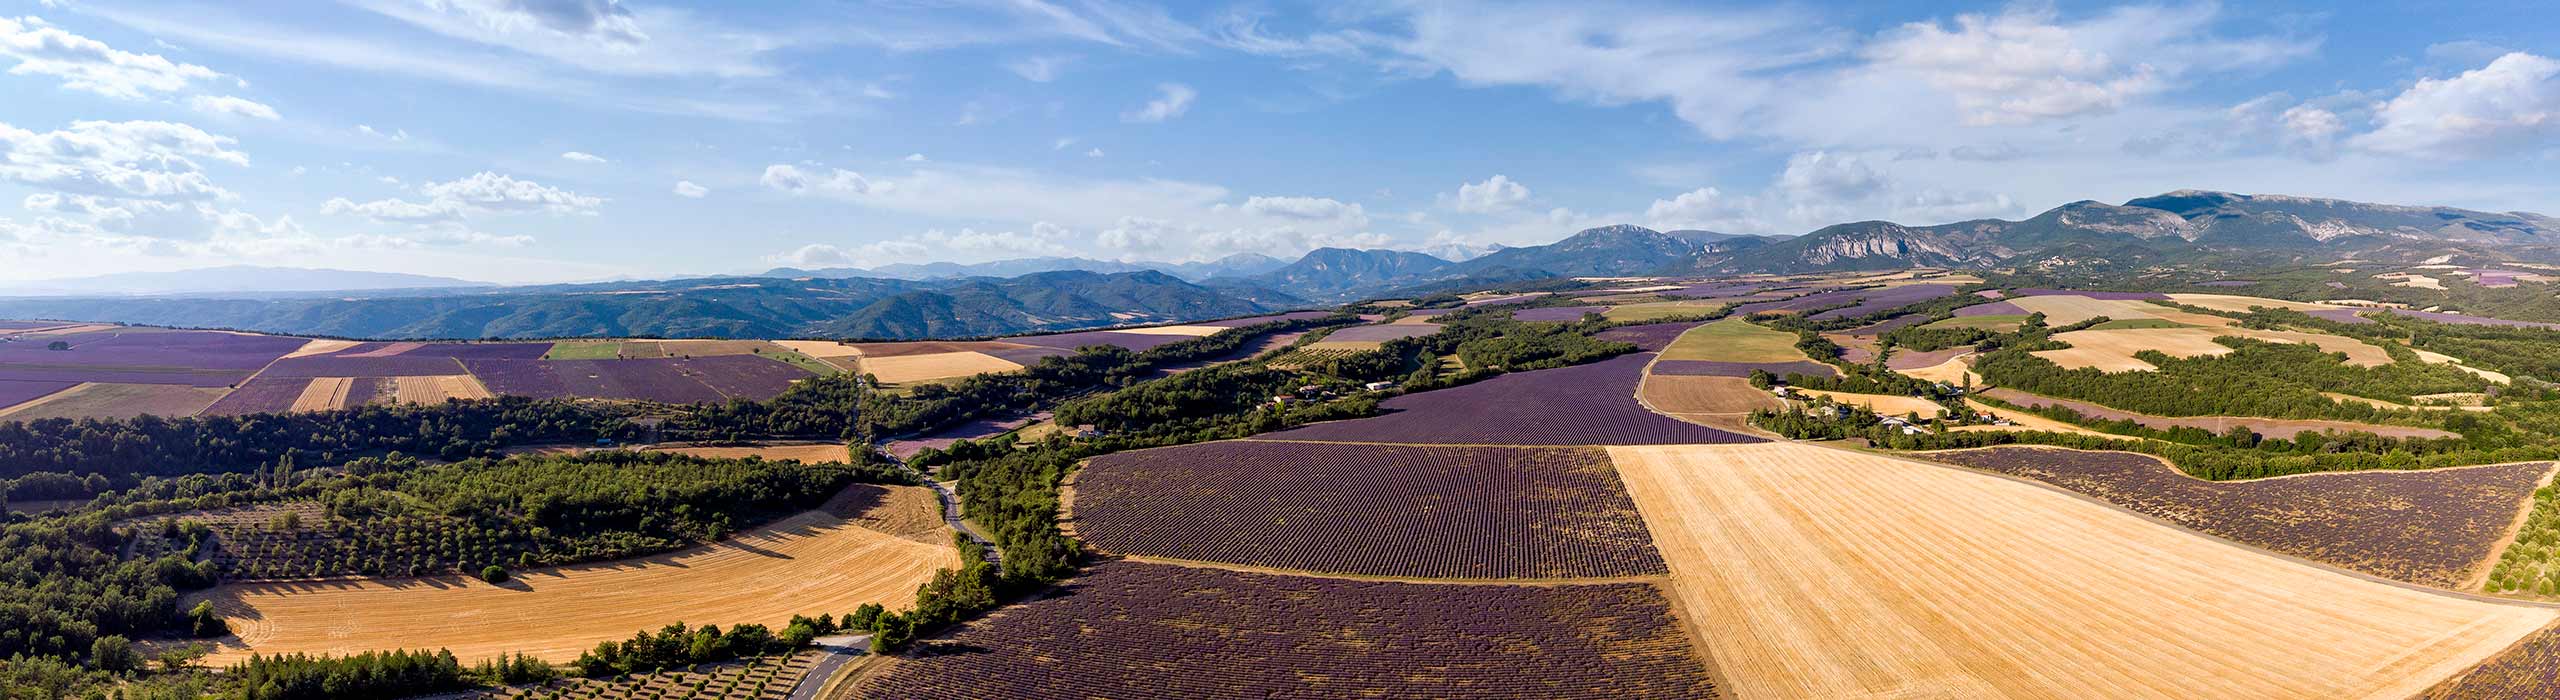 Panoramic view of the Valensole plateau and its many lavender fields